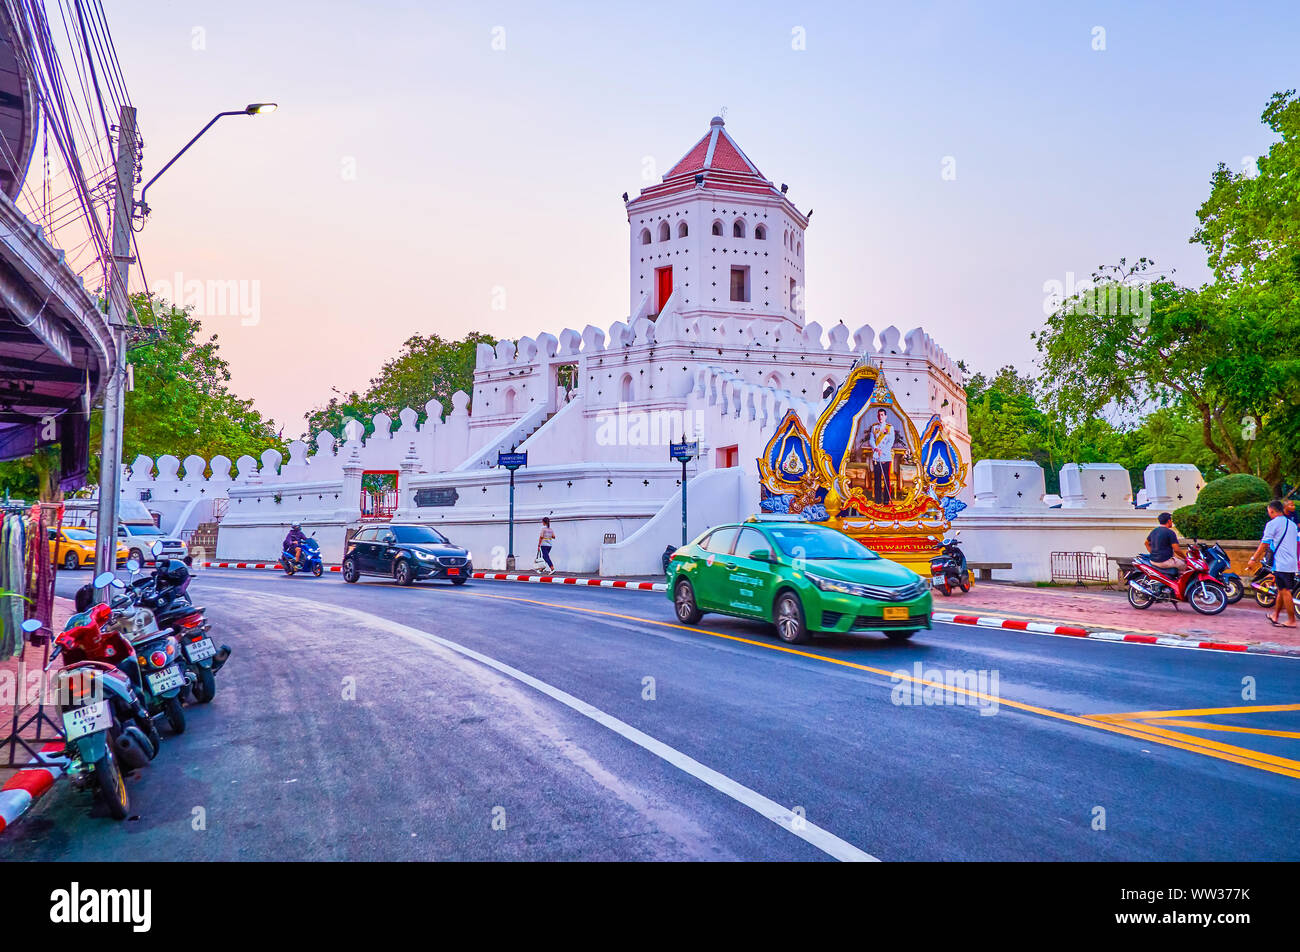 BANGKOK, THAILAND - APRIL 24, 2019: The Phra Sumen Fort located in public park in historical old town and is a very popular destination during evening Stock Photo